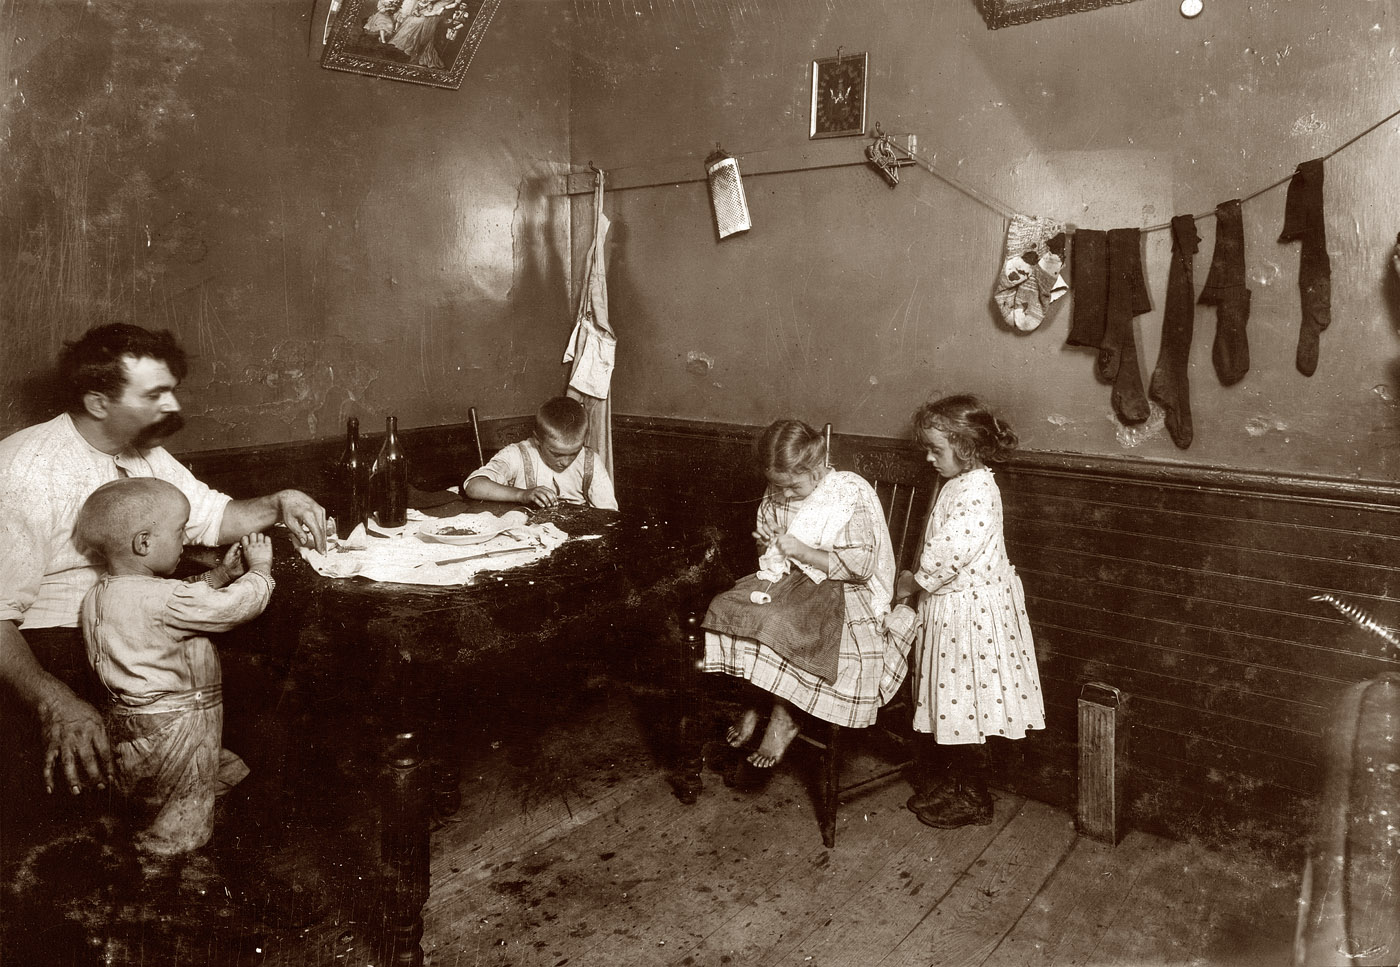 August 1912. Somerville, Massachusetts. "Annie Fedele, 22 Horace Street. Doing crochet on underwear in dirty kitchen. Said she often works here and eats out in the back yard. The people are supposed to do the work only under certain restrictions, but when the inspector and the one who delivers the goods are not around, they do as they please. A good illustration of the difficulty in trying to regulate Home Work." View full size. Photo and caption by Lewis Wickes Hine.